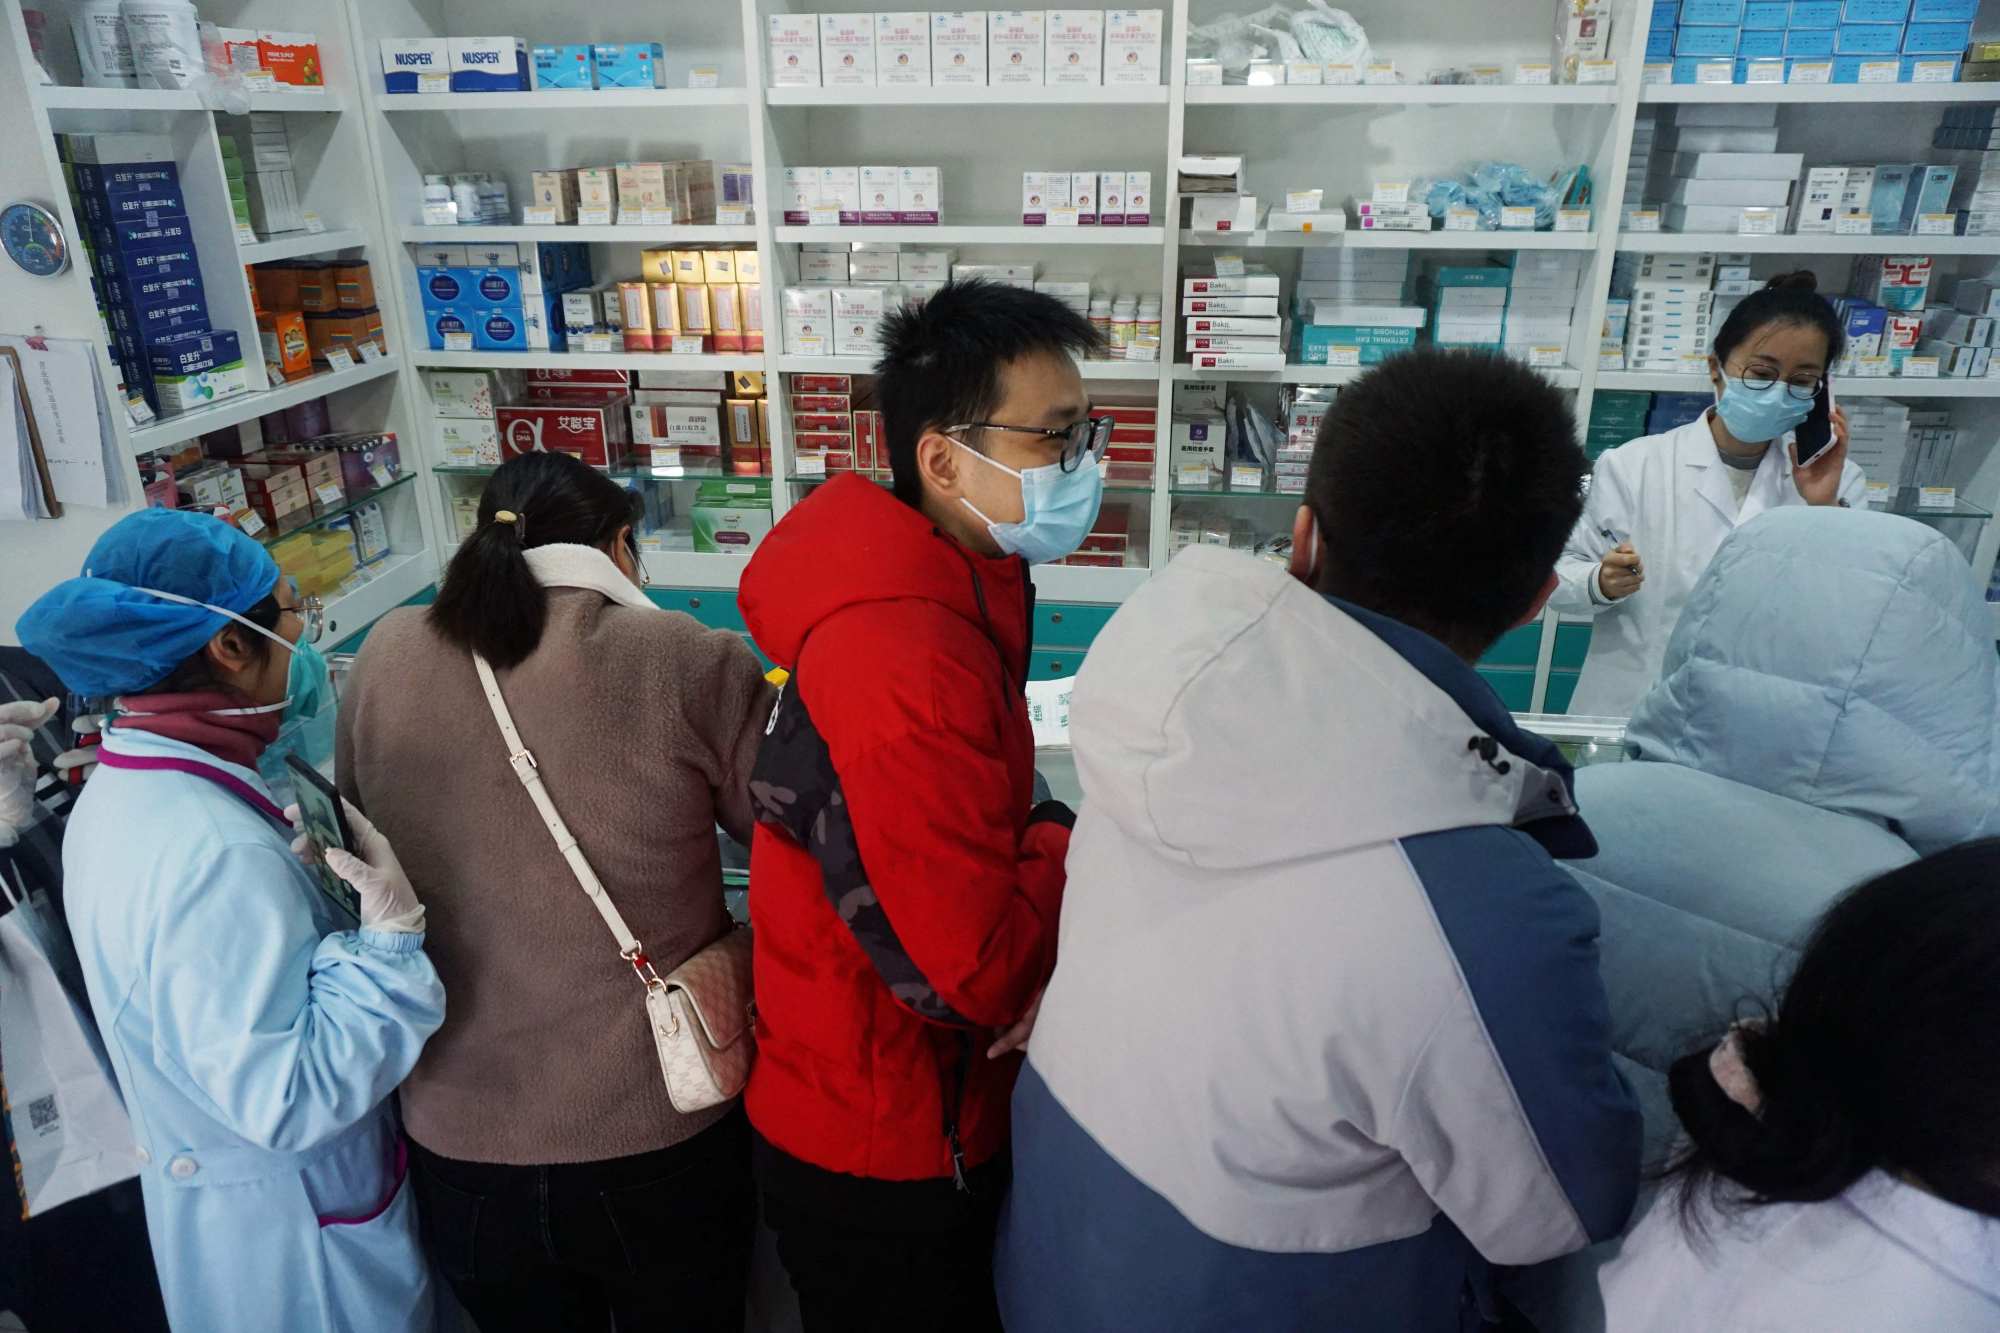 Queues for Covid-19 supplies at a pharmacy in Hangzhou, in China’s eastern Zhejiang province. Photo: AFP